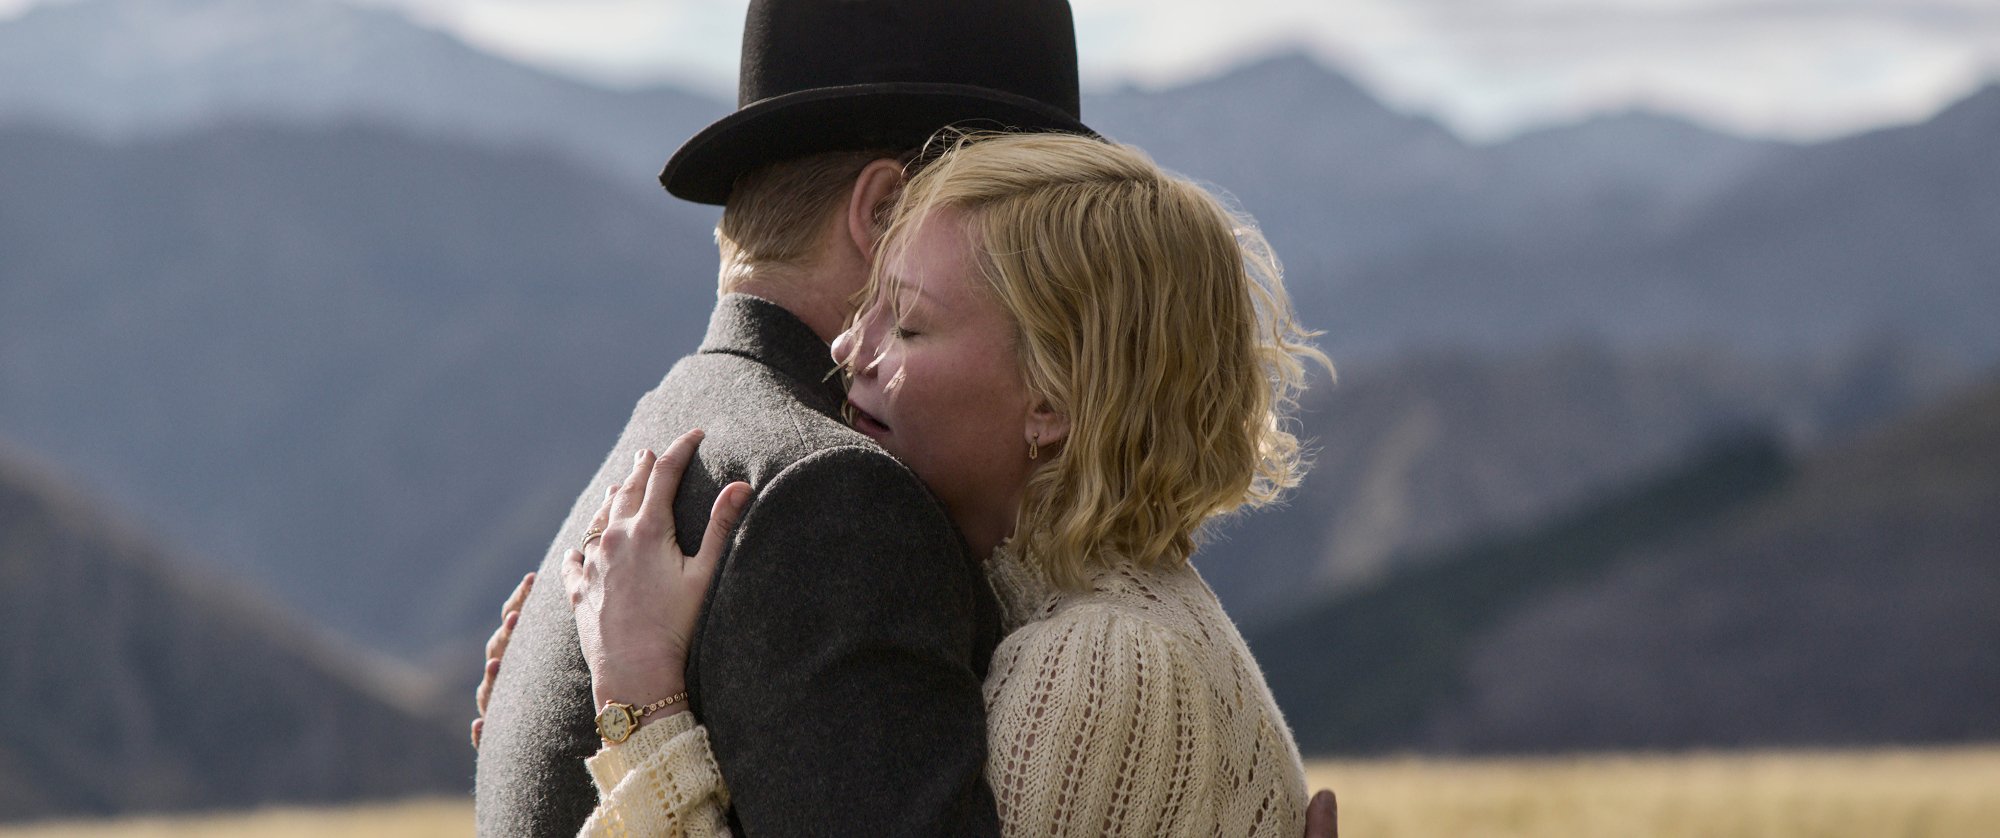 Jane Campion's 'The Power of the Dog' Jesse Plemons as George Burbank and Kirsten Dunst as Rose Gordon embracing each other in Western clothing in front of mountains